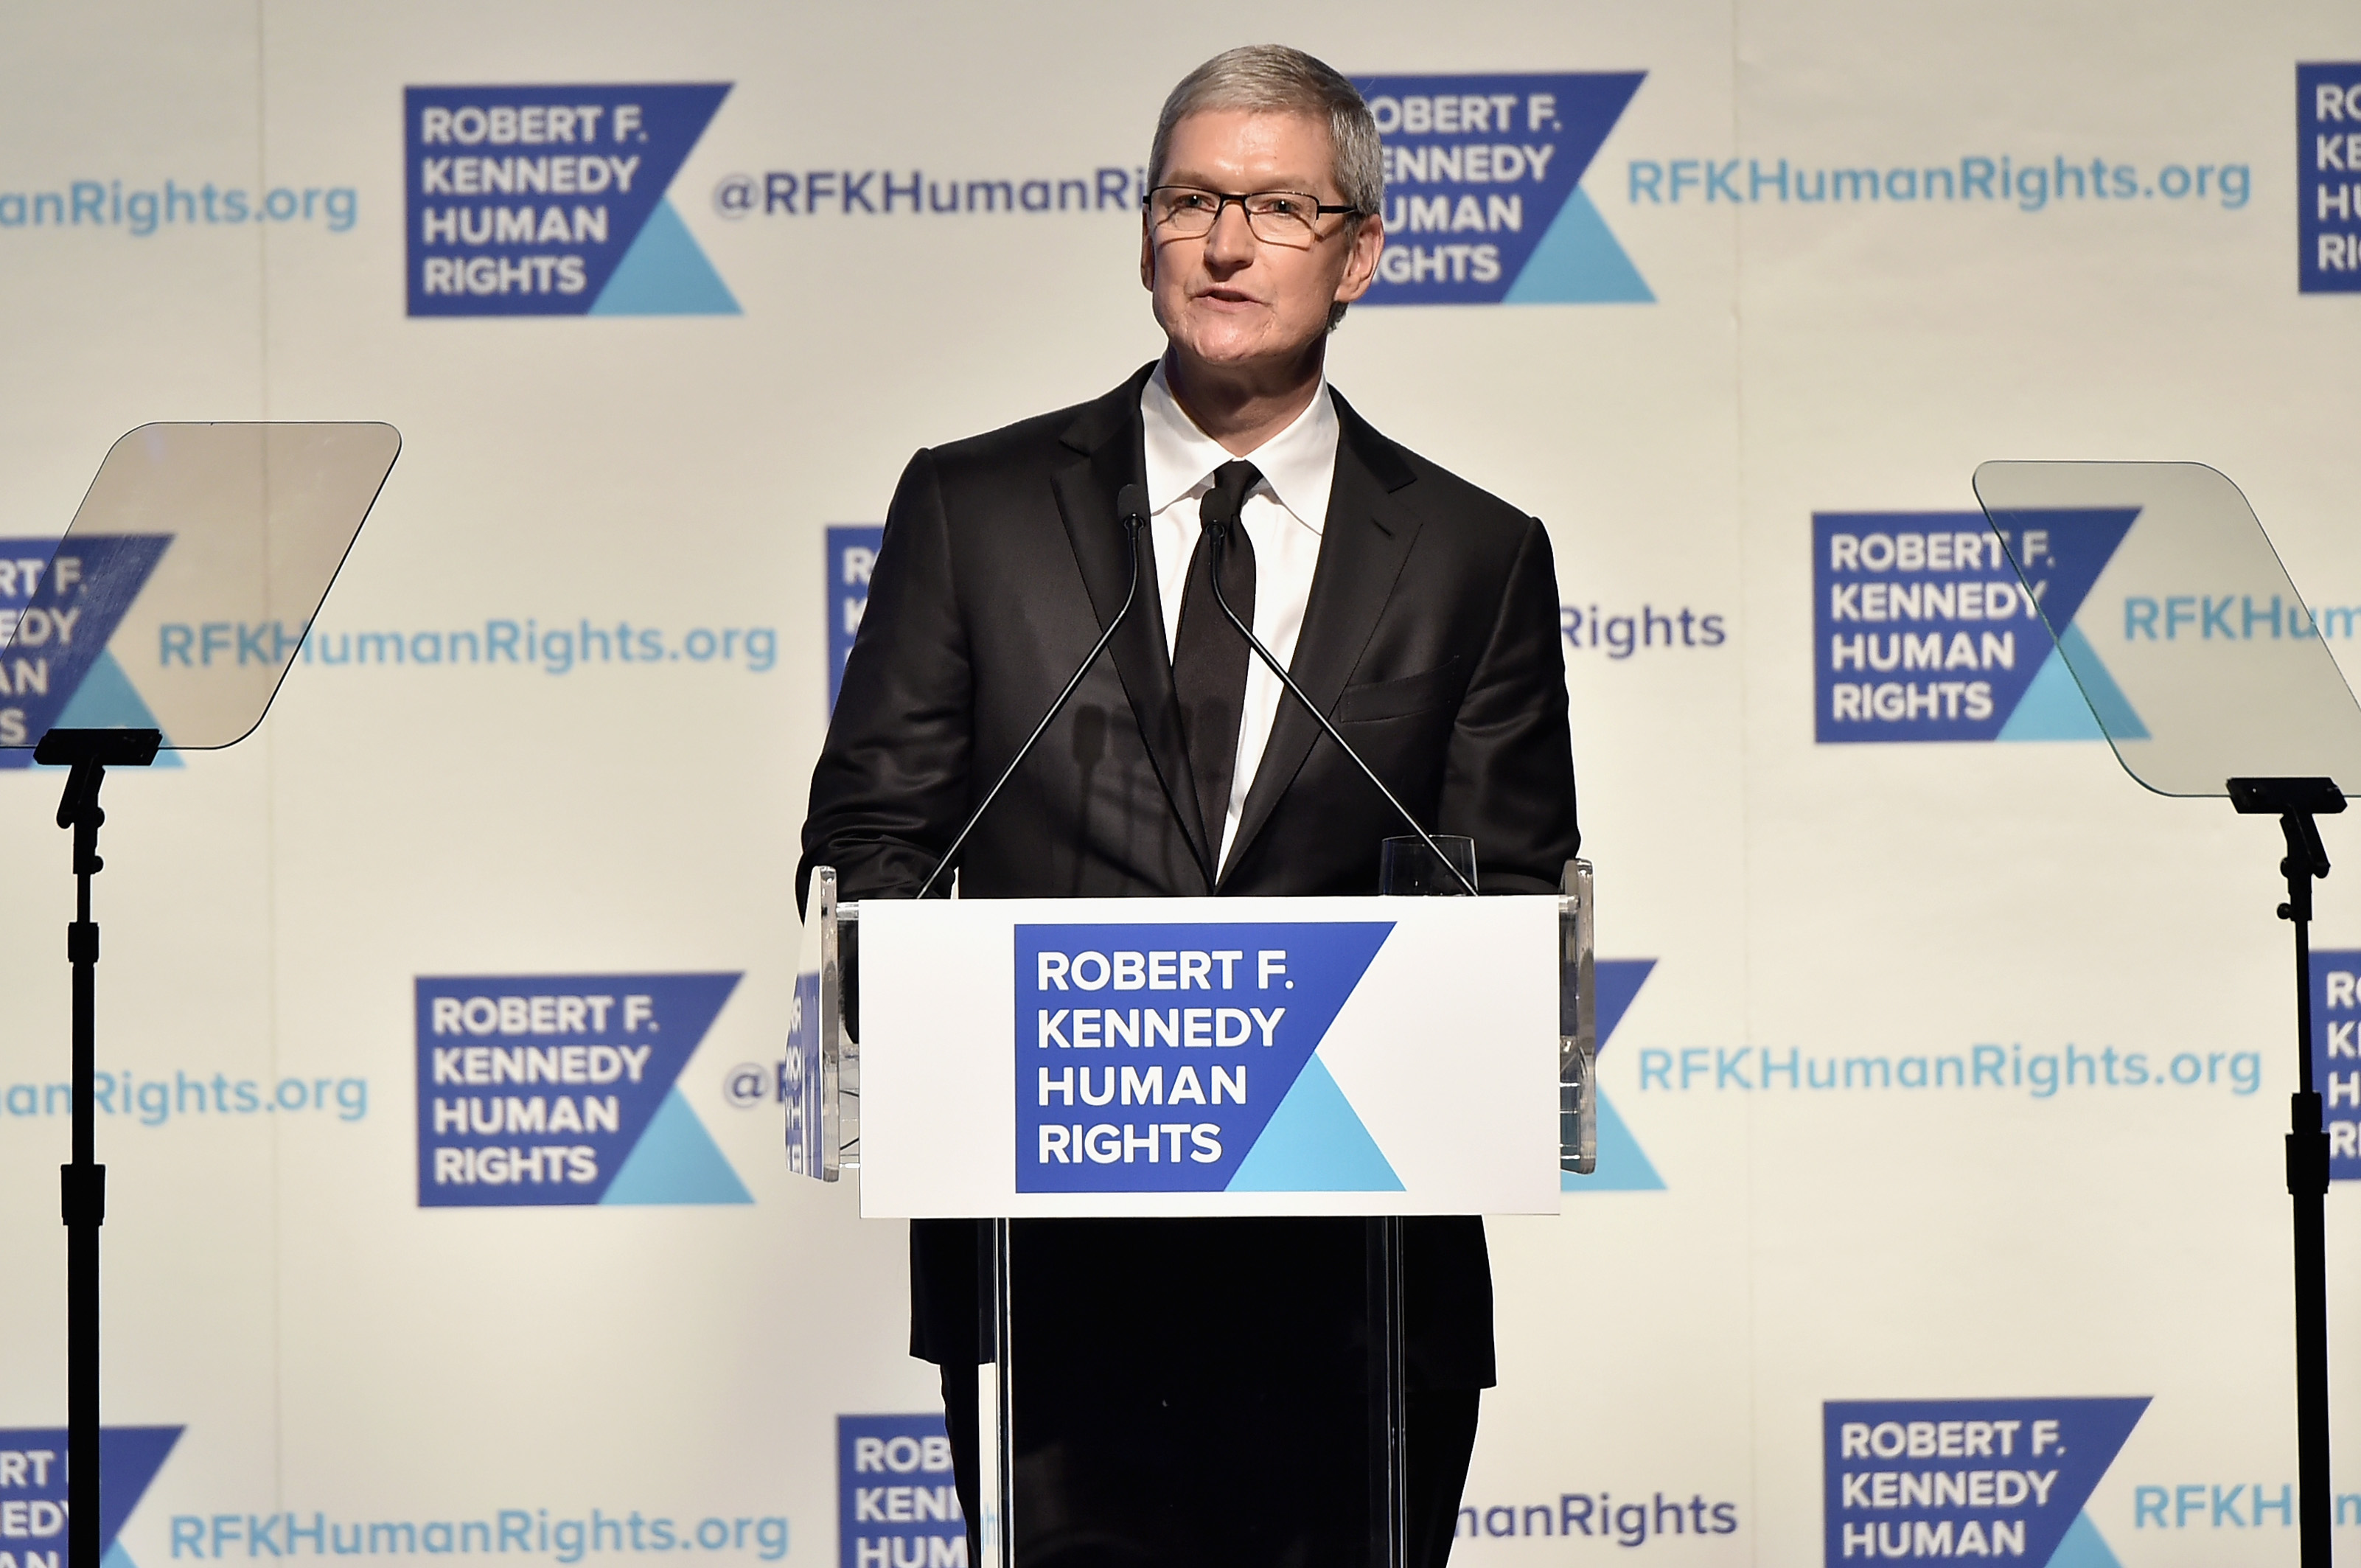 Apple CEO Tim Cook speaks onstage as Robert F. Kennedy Human Rights hosts The 2015 Ripple Of Hope Awards on Dec. 8, 2015 in New York City. (Theo Wargo/Getty Images)